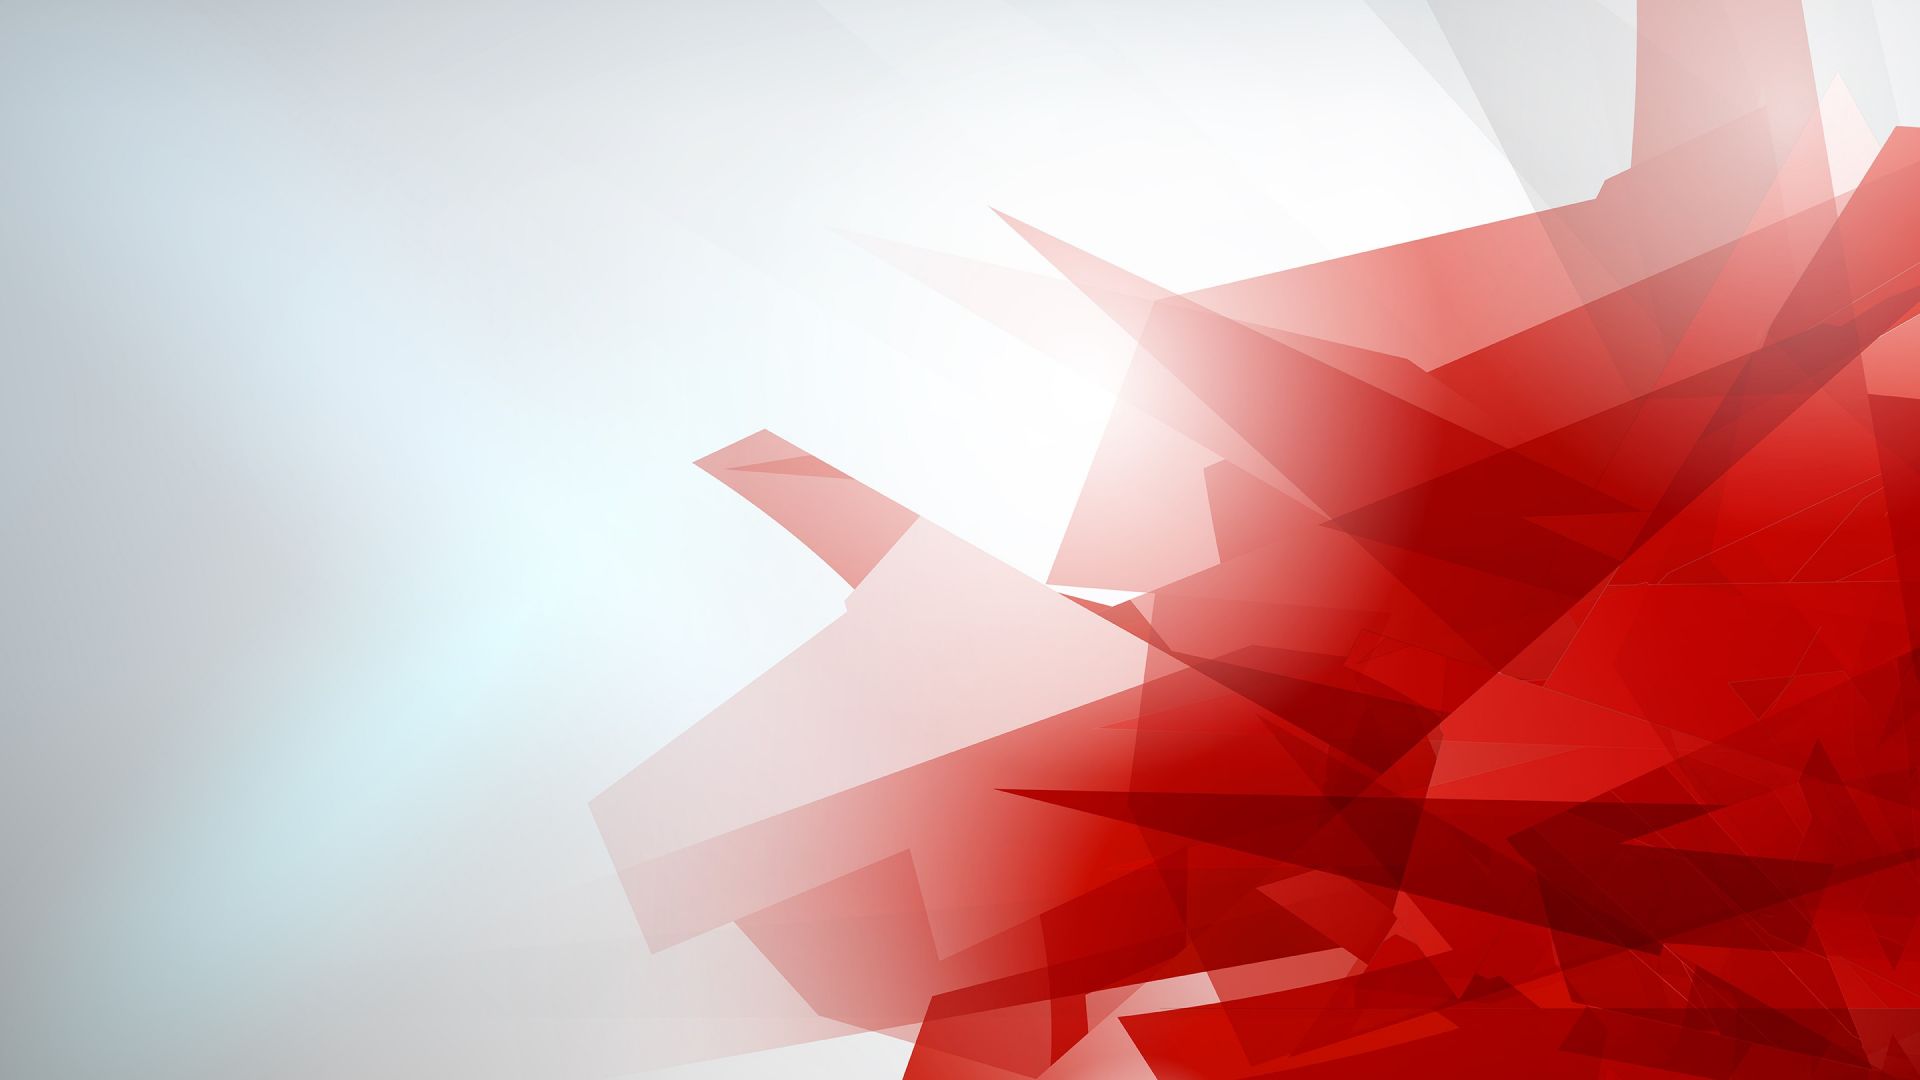 Wallpaper Red, abstract, low poly art